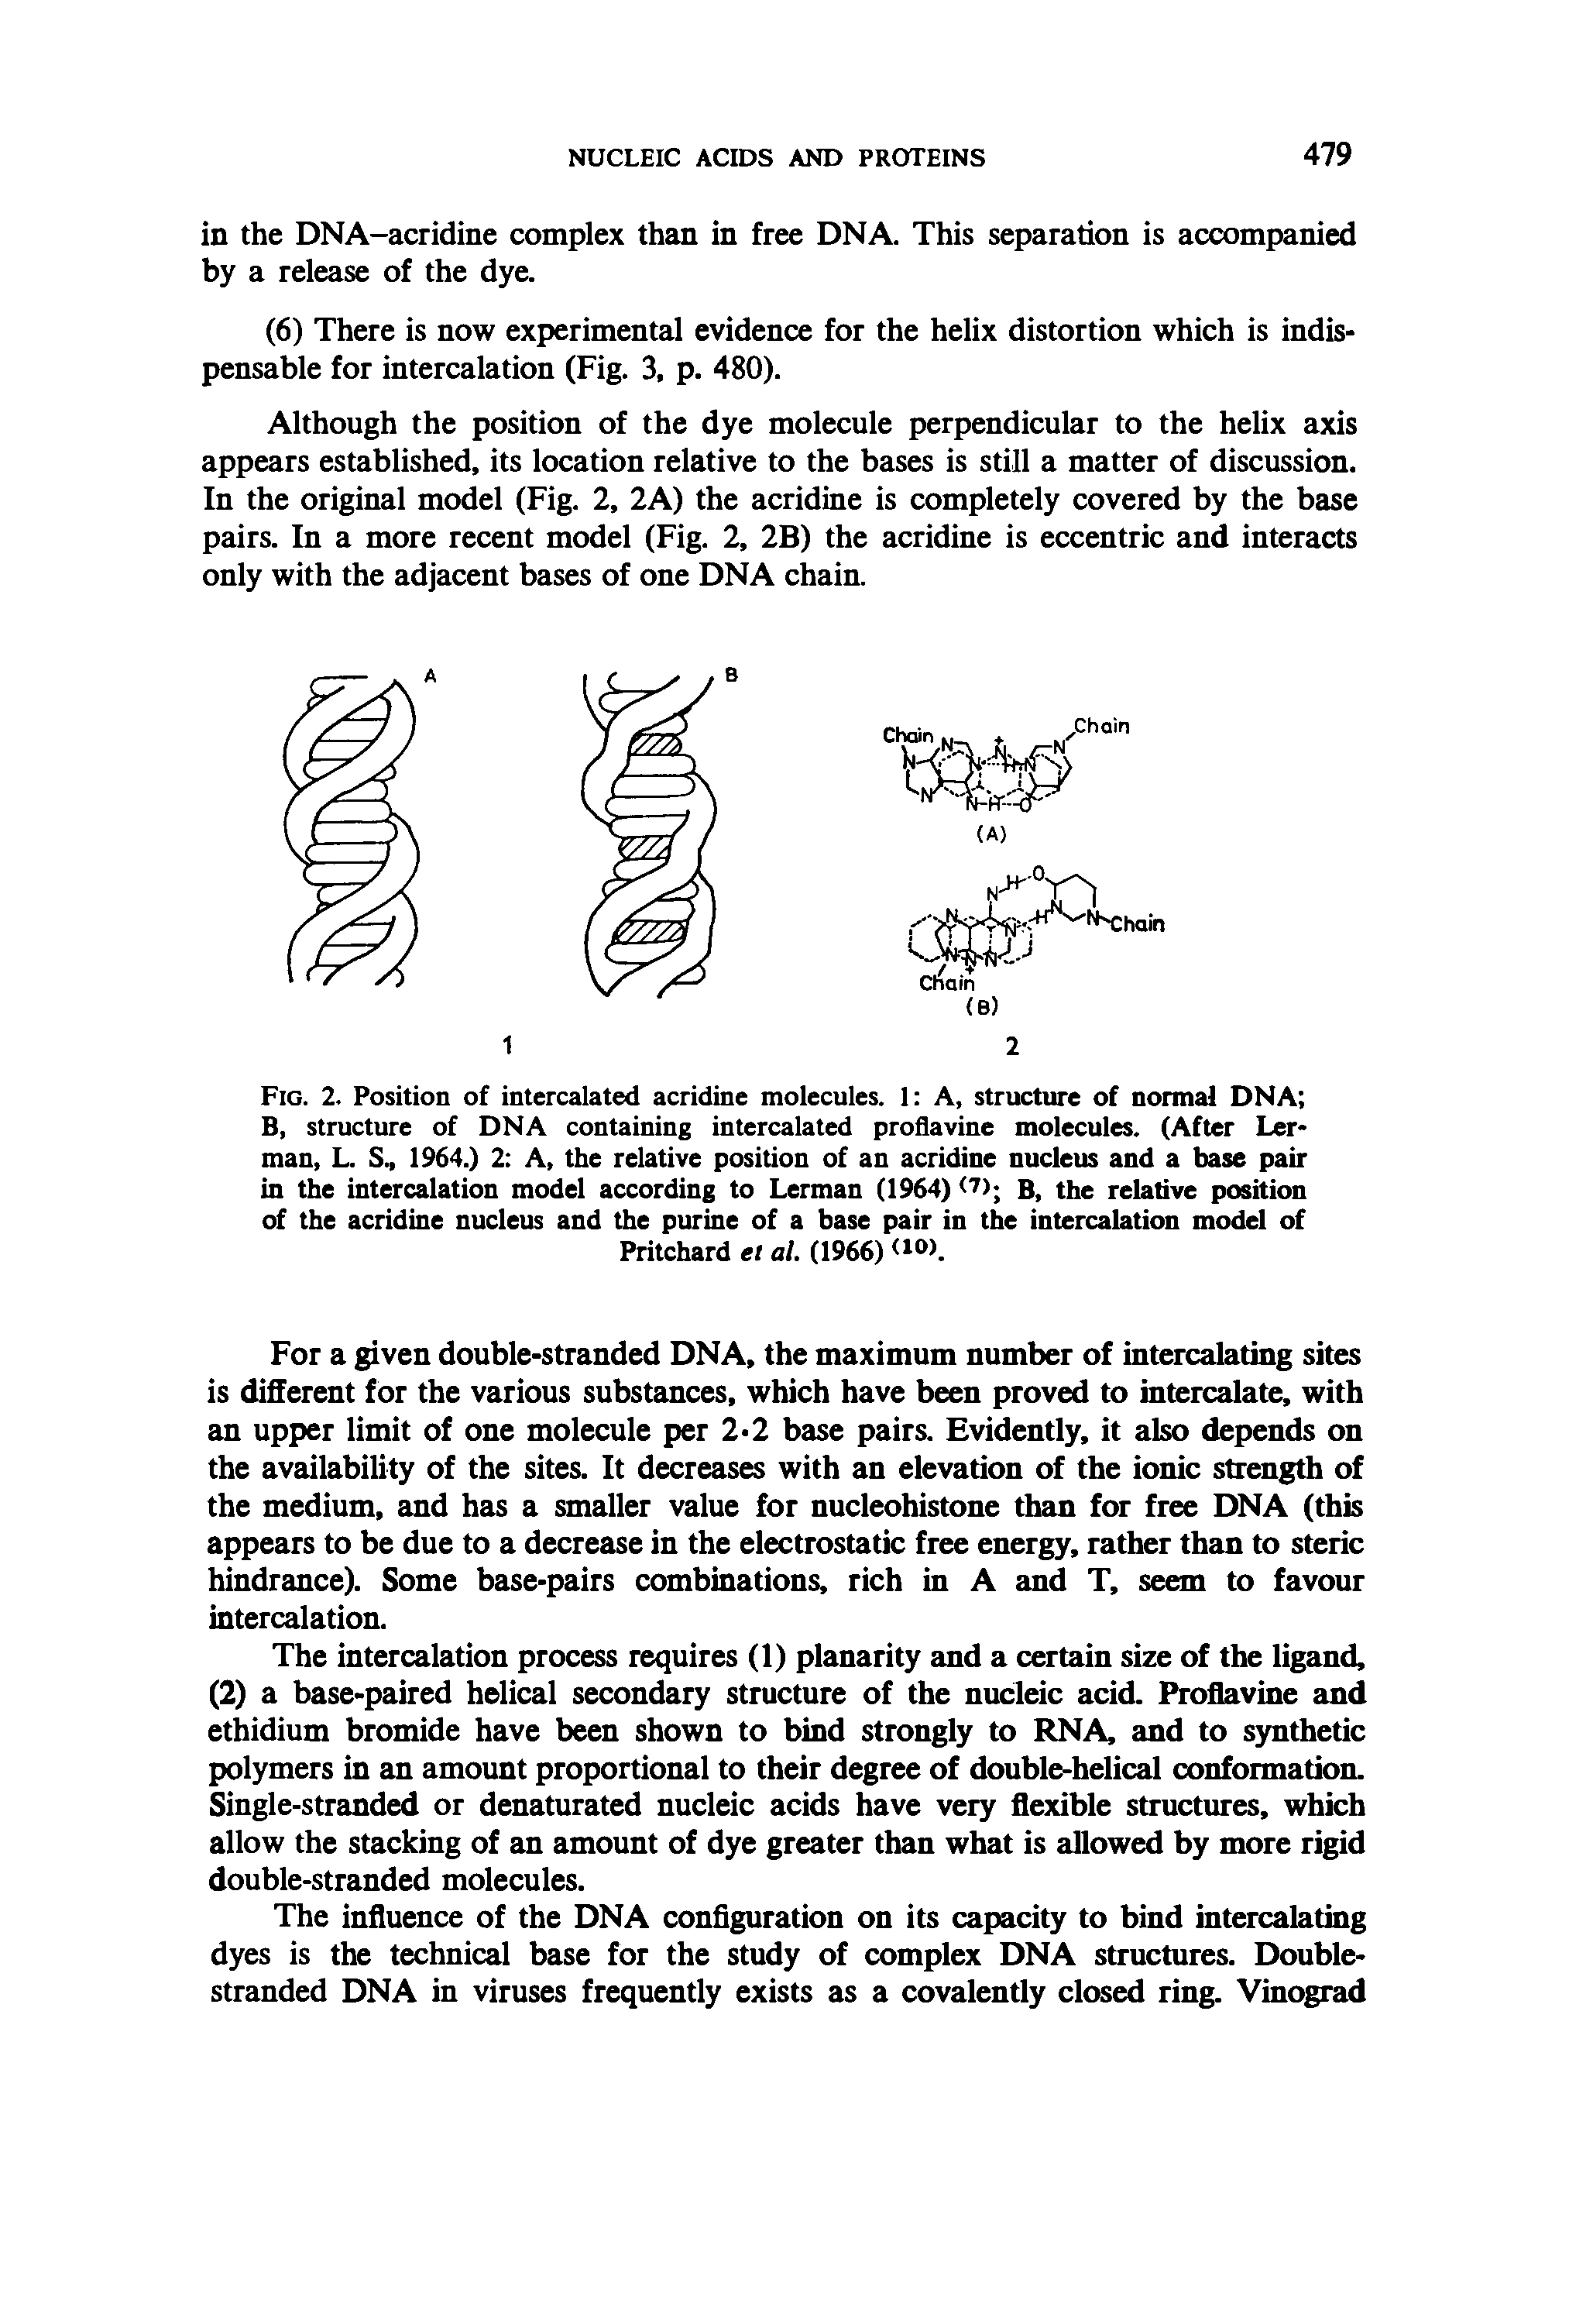 Fig. 2. Position of intercalated acridine molecules. 1 A, structure of normal DNA B, structure of DNA containing intercalated proflavine molecules. (After Ler-man, L. S., 1964.) 2 A, the relative position of an acridine nucleus and a base pair in the intercalation model according to Lerman (1964) b, the relative position of the acridine nucleus and the purine of a base pair in the intercalation model of...